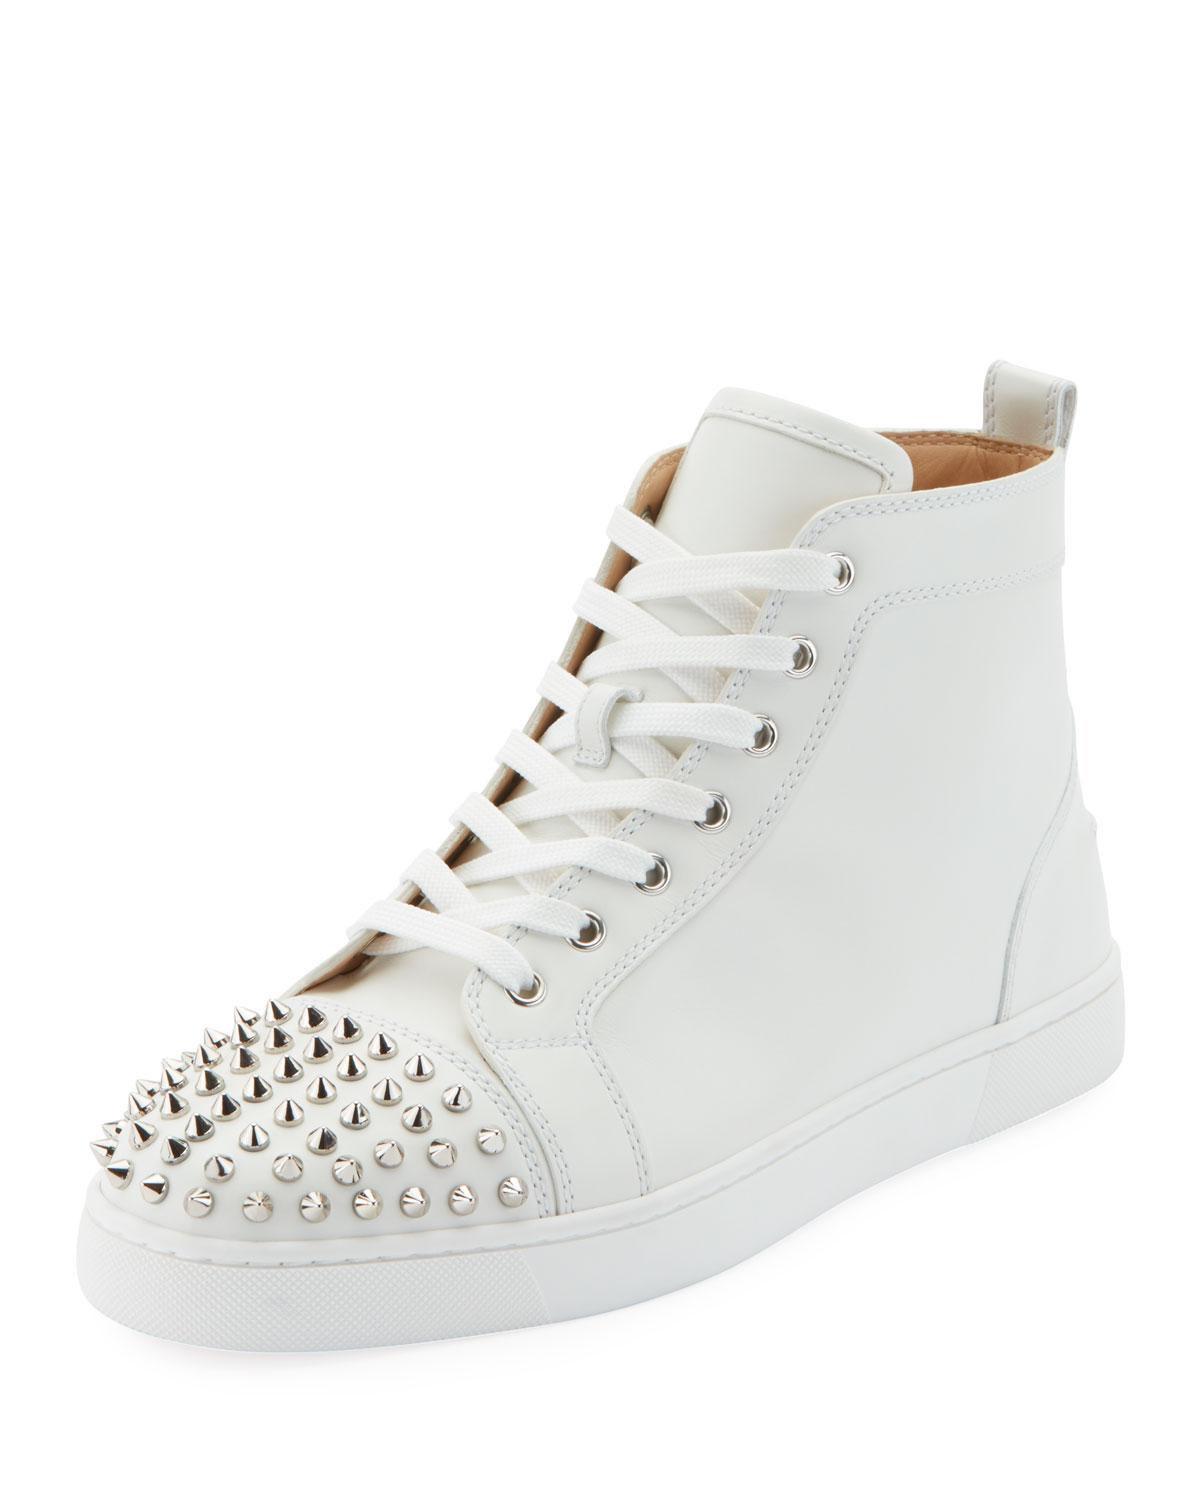 Christian Louboutin Leather Men's Lou Spikes High-top Sneakers in White ...